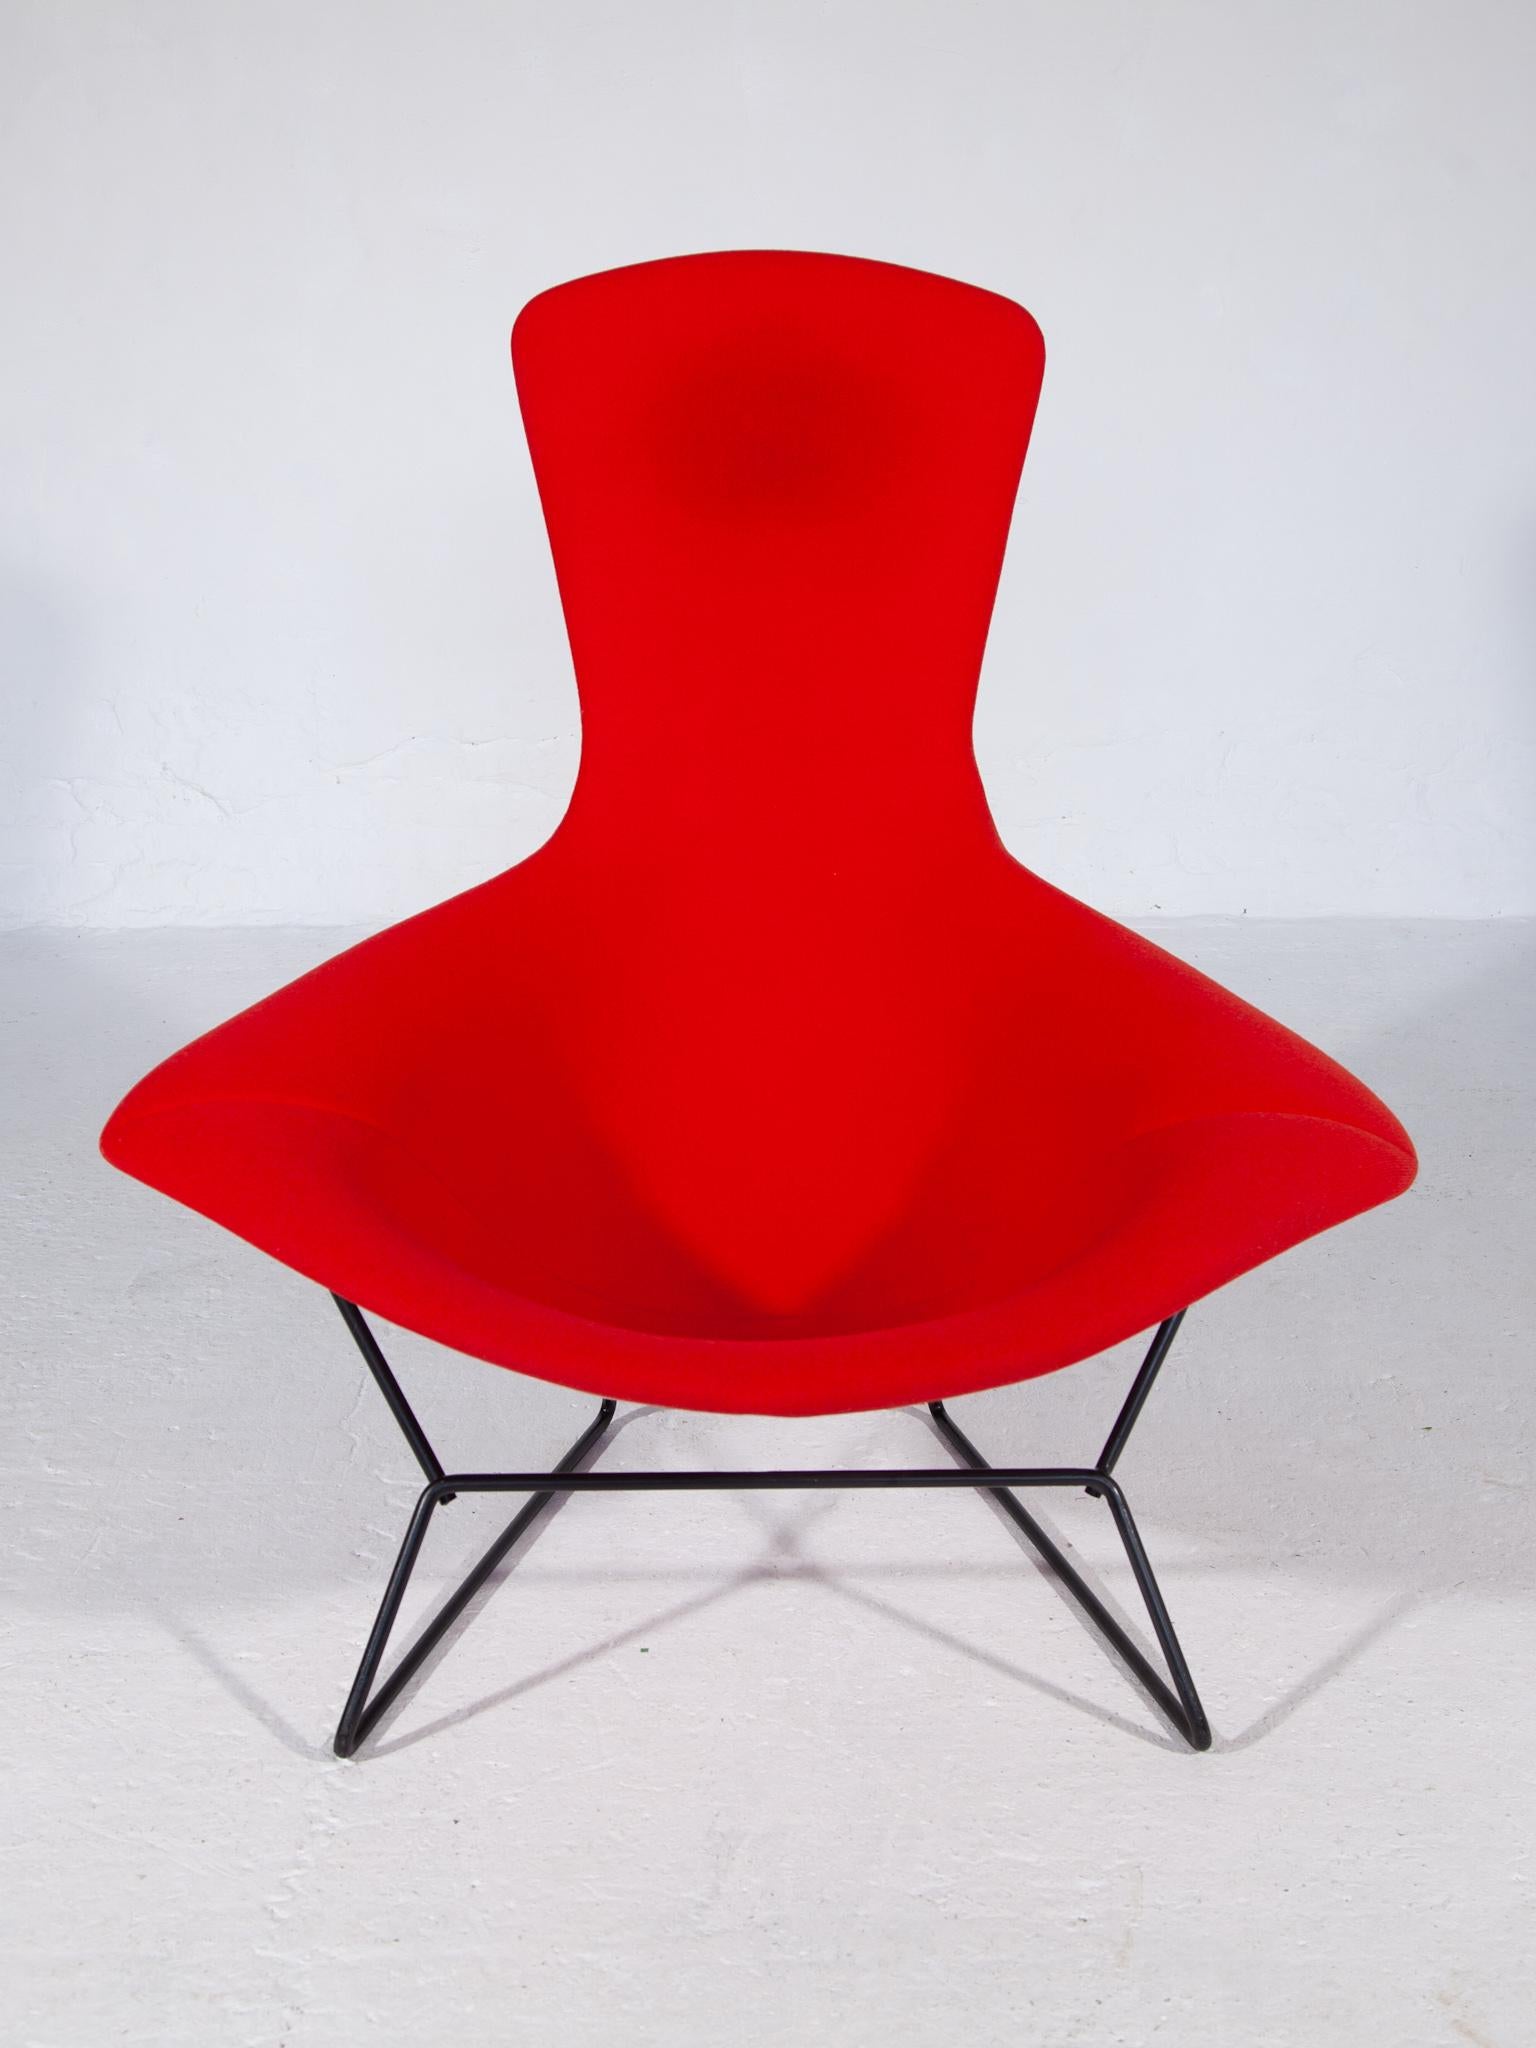 Original Vintage Harry Bertoia Bird chair for Knoll 1960s with an original Knoll fabric flame red slip cover on a metal white and black coated frame.The High Wingback chair is in original good condition with some signs of use. 
Bertoia chairs are